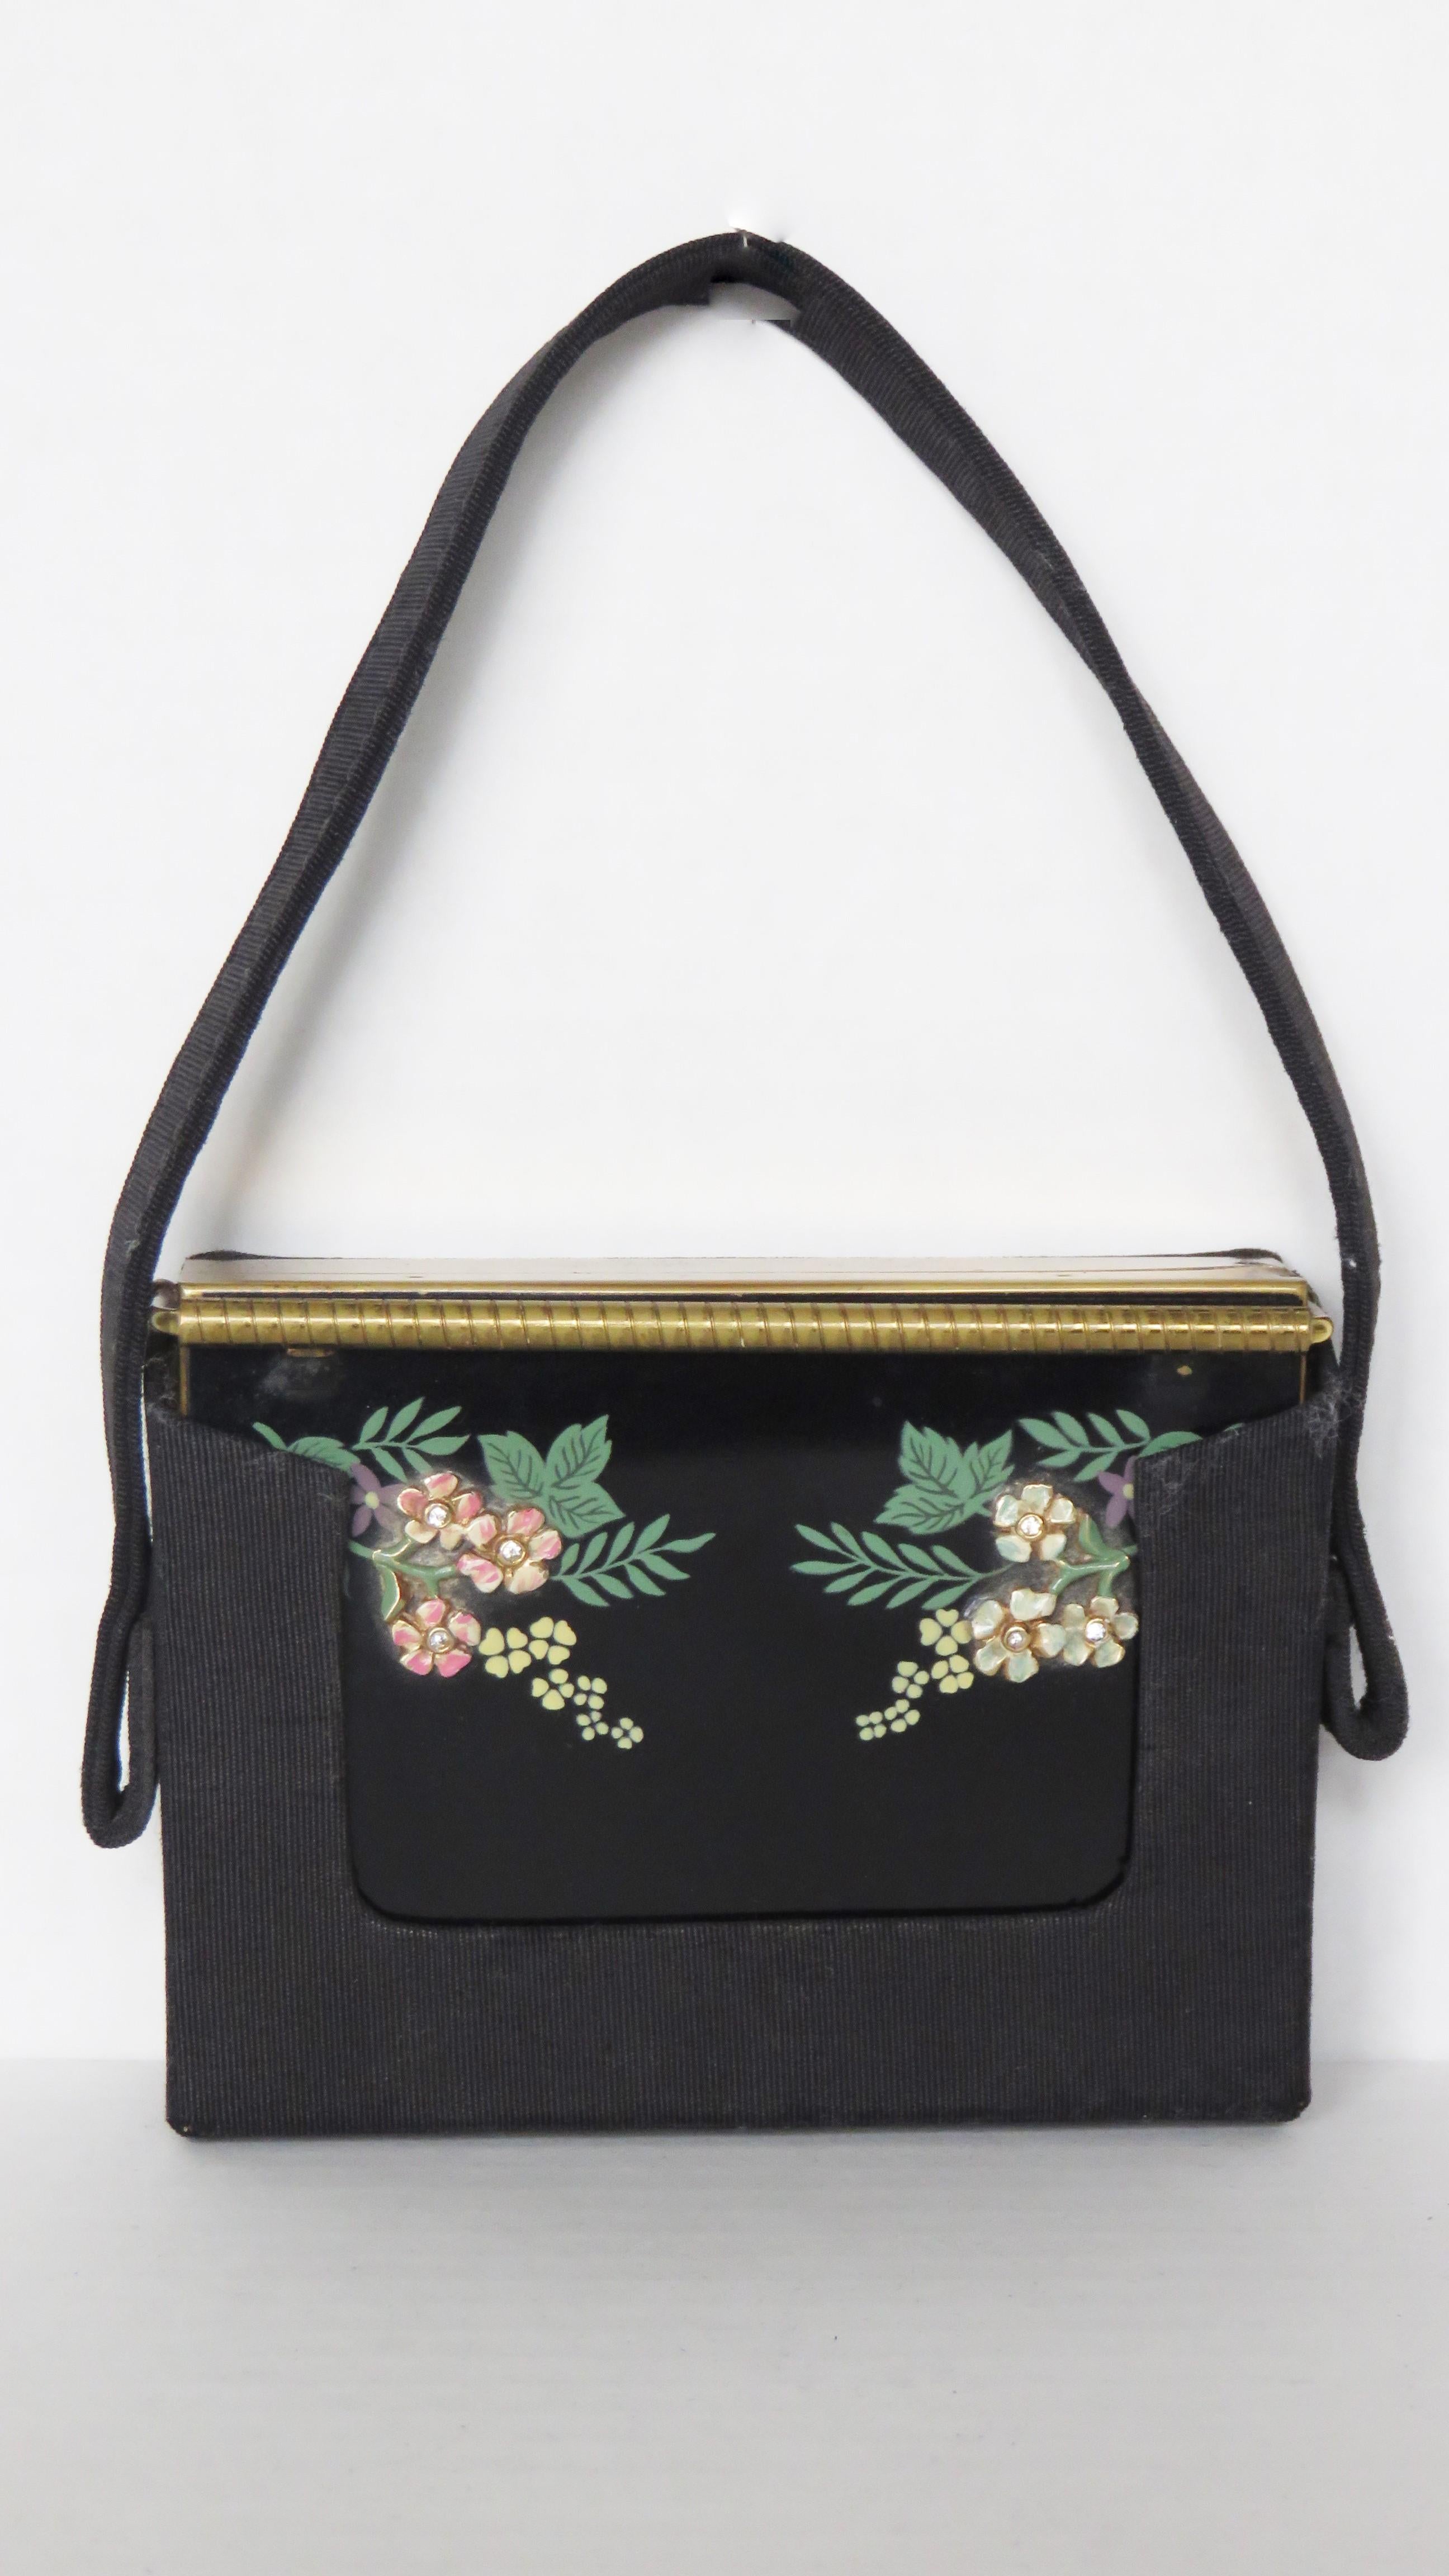 A gorgeous black enamel compact, minaudiere, purse from Volupte.  It has a black front decorated with enamel flowers and painted leaves on either side and the back is brushed gold metal.  It closes with a fine bar that closes over the top and it